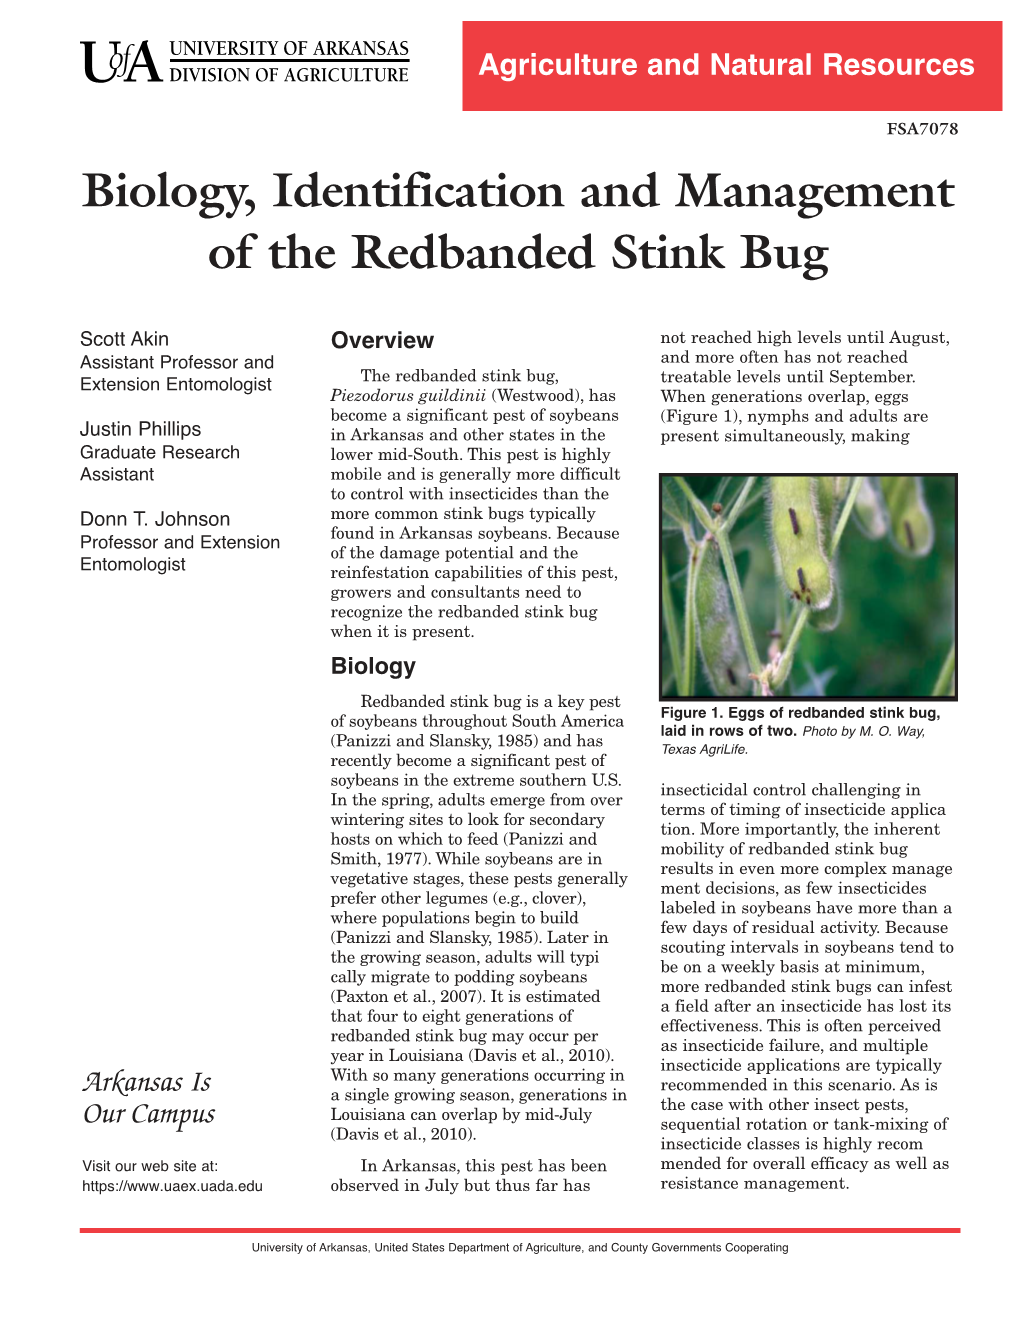 Biology, Identification and Management of the Redbanded Stink Bug